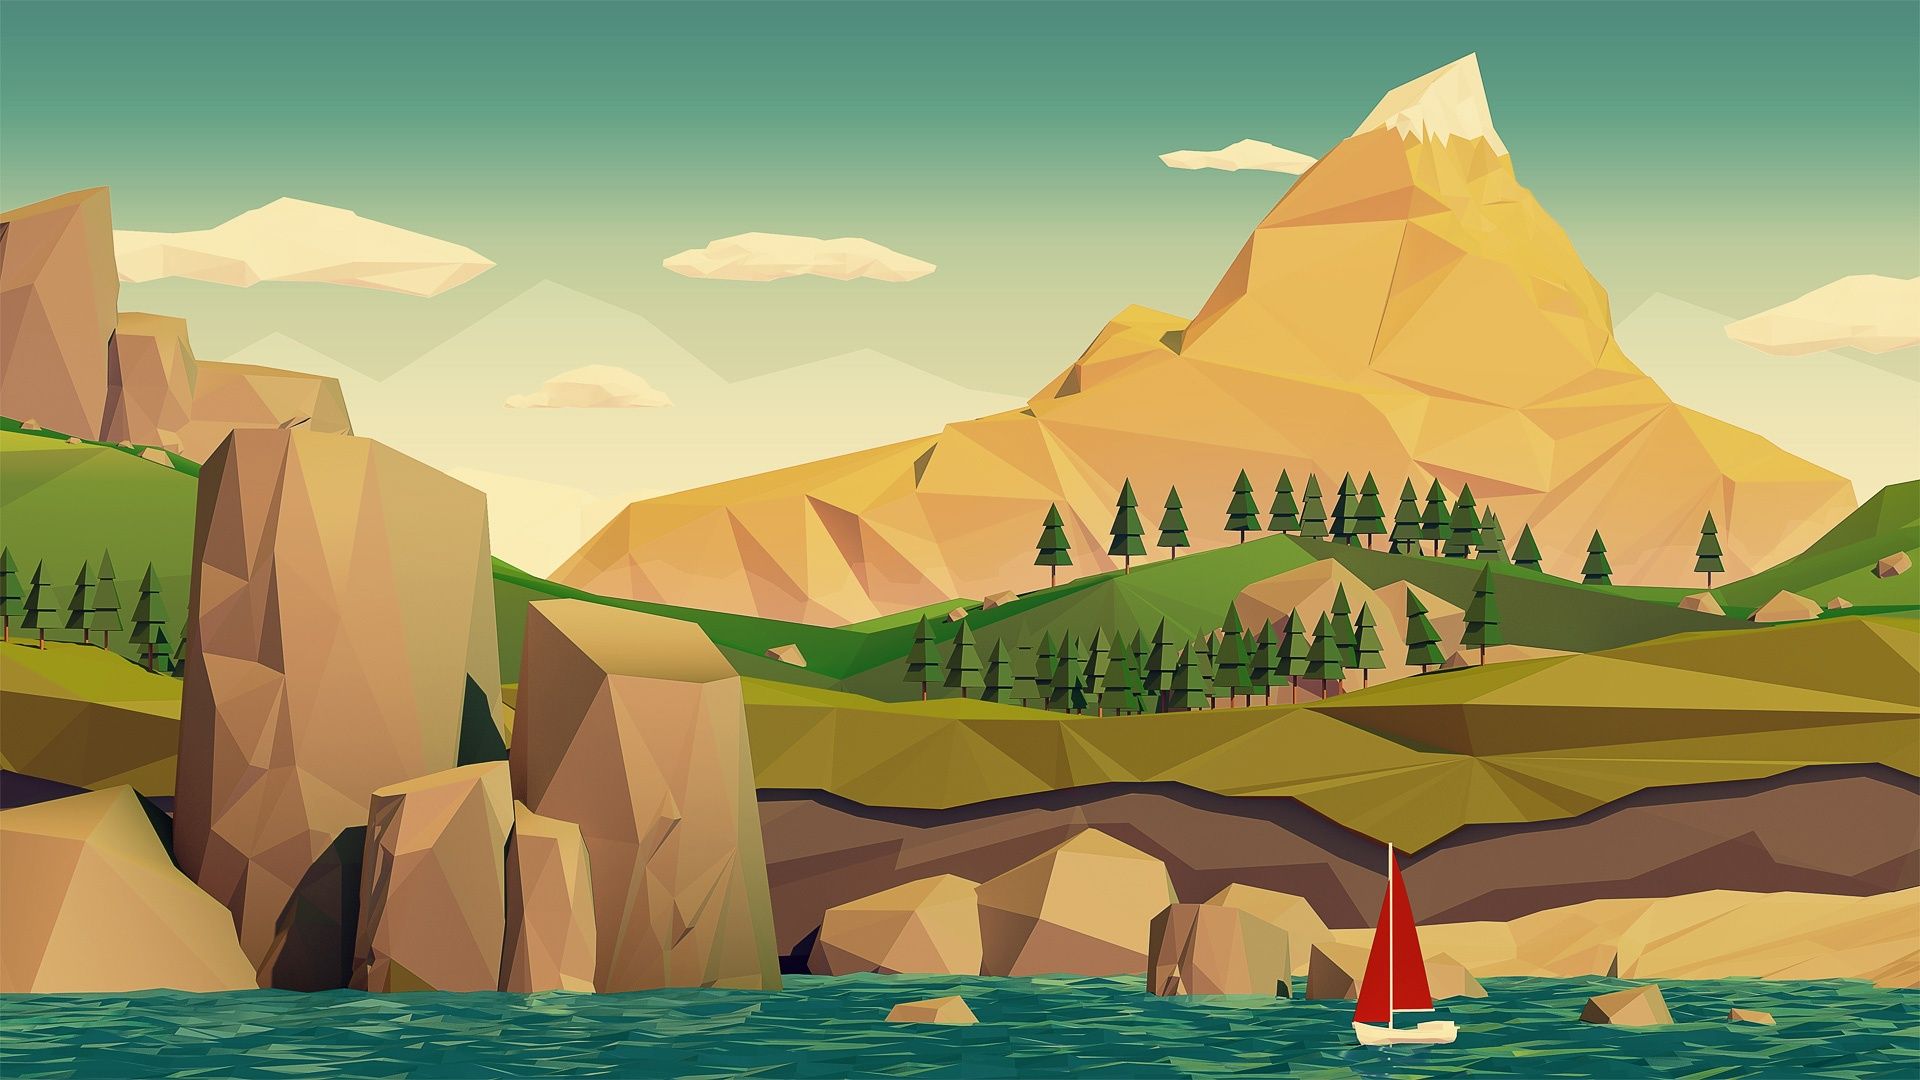 Low poly illustration of a sailboat on the sea - Low poly